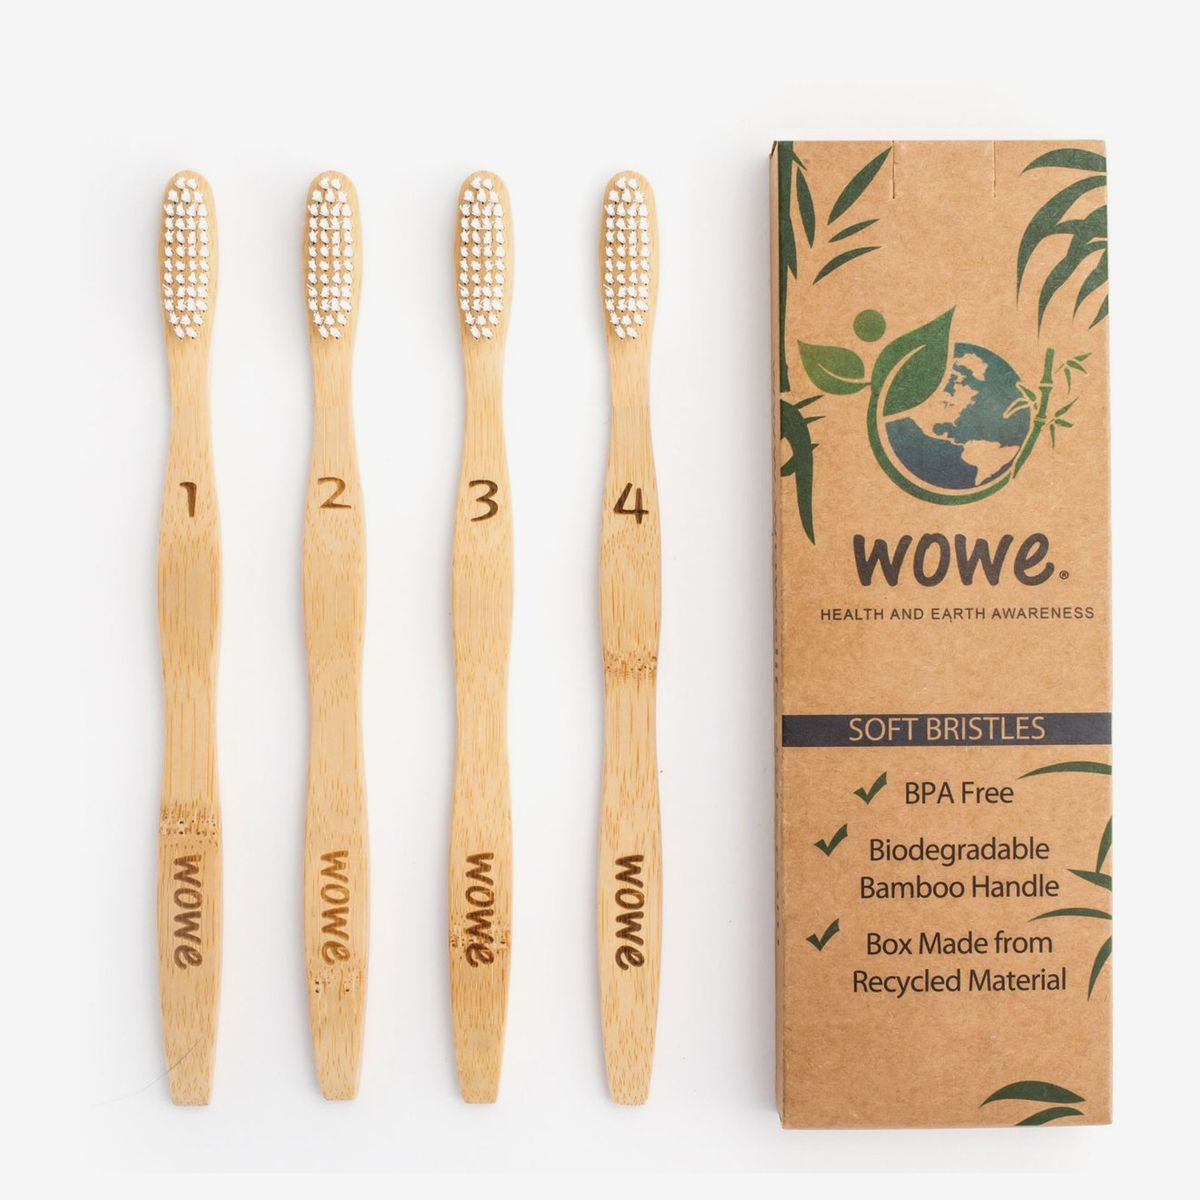 8 Best Bamboo Toothbrushes 2020 | The Strategist